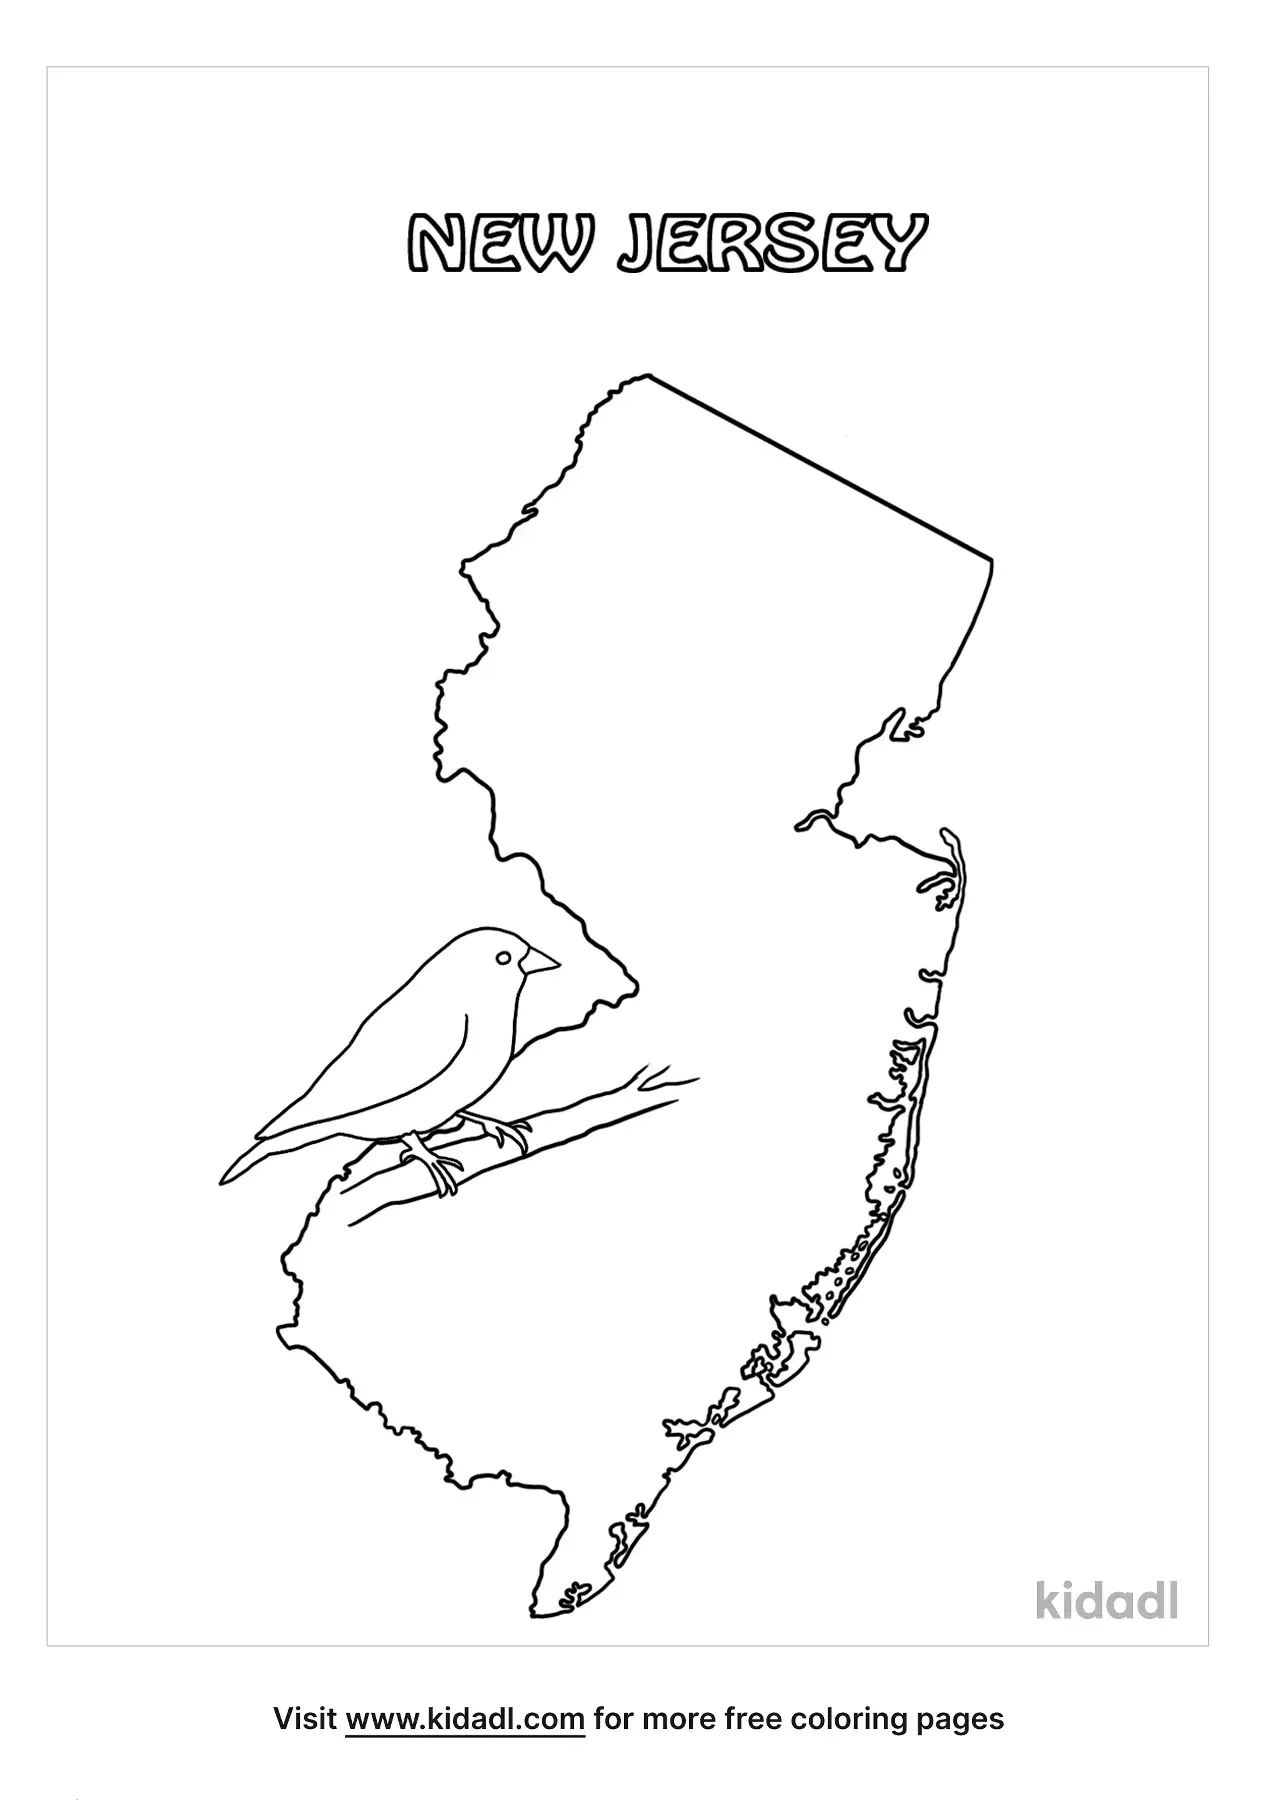 Free Outline State Of New Jersey Coloring Page | Coloring Page ...